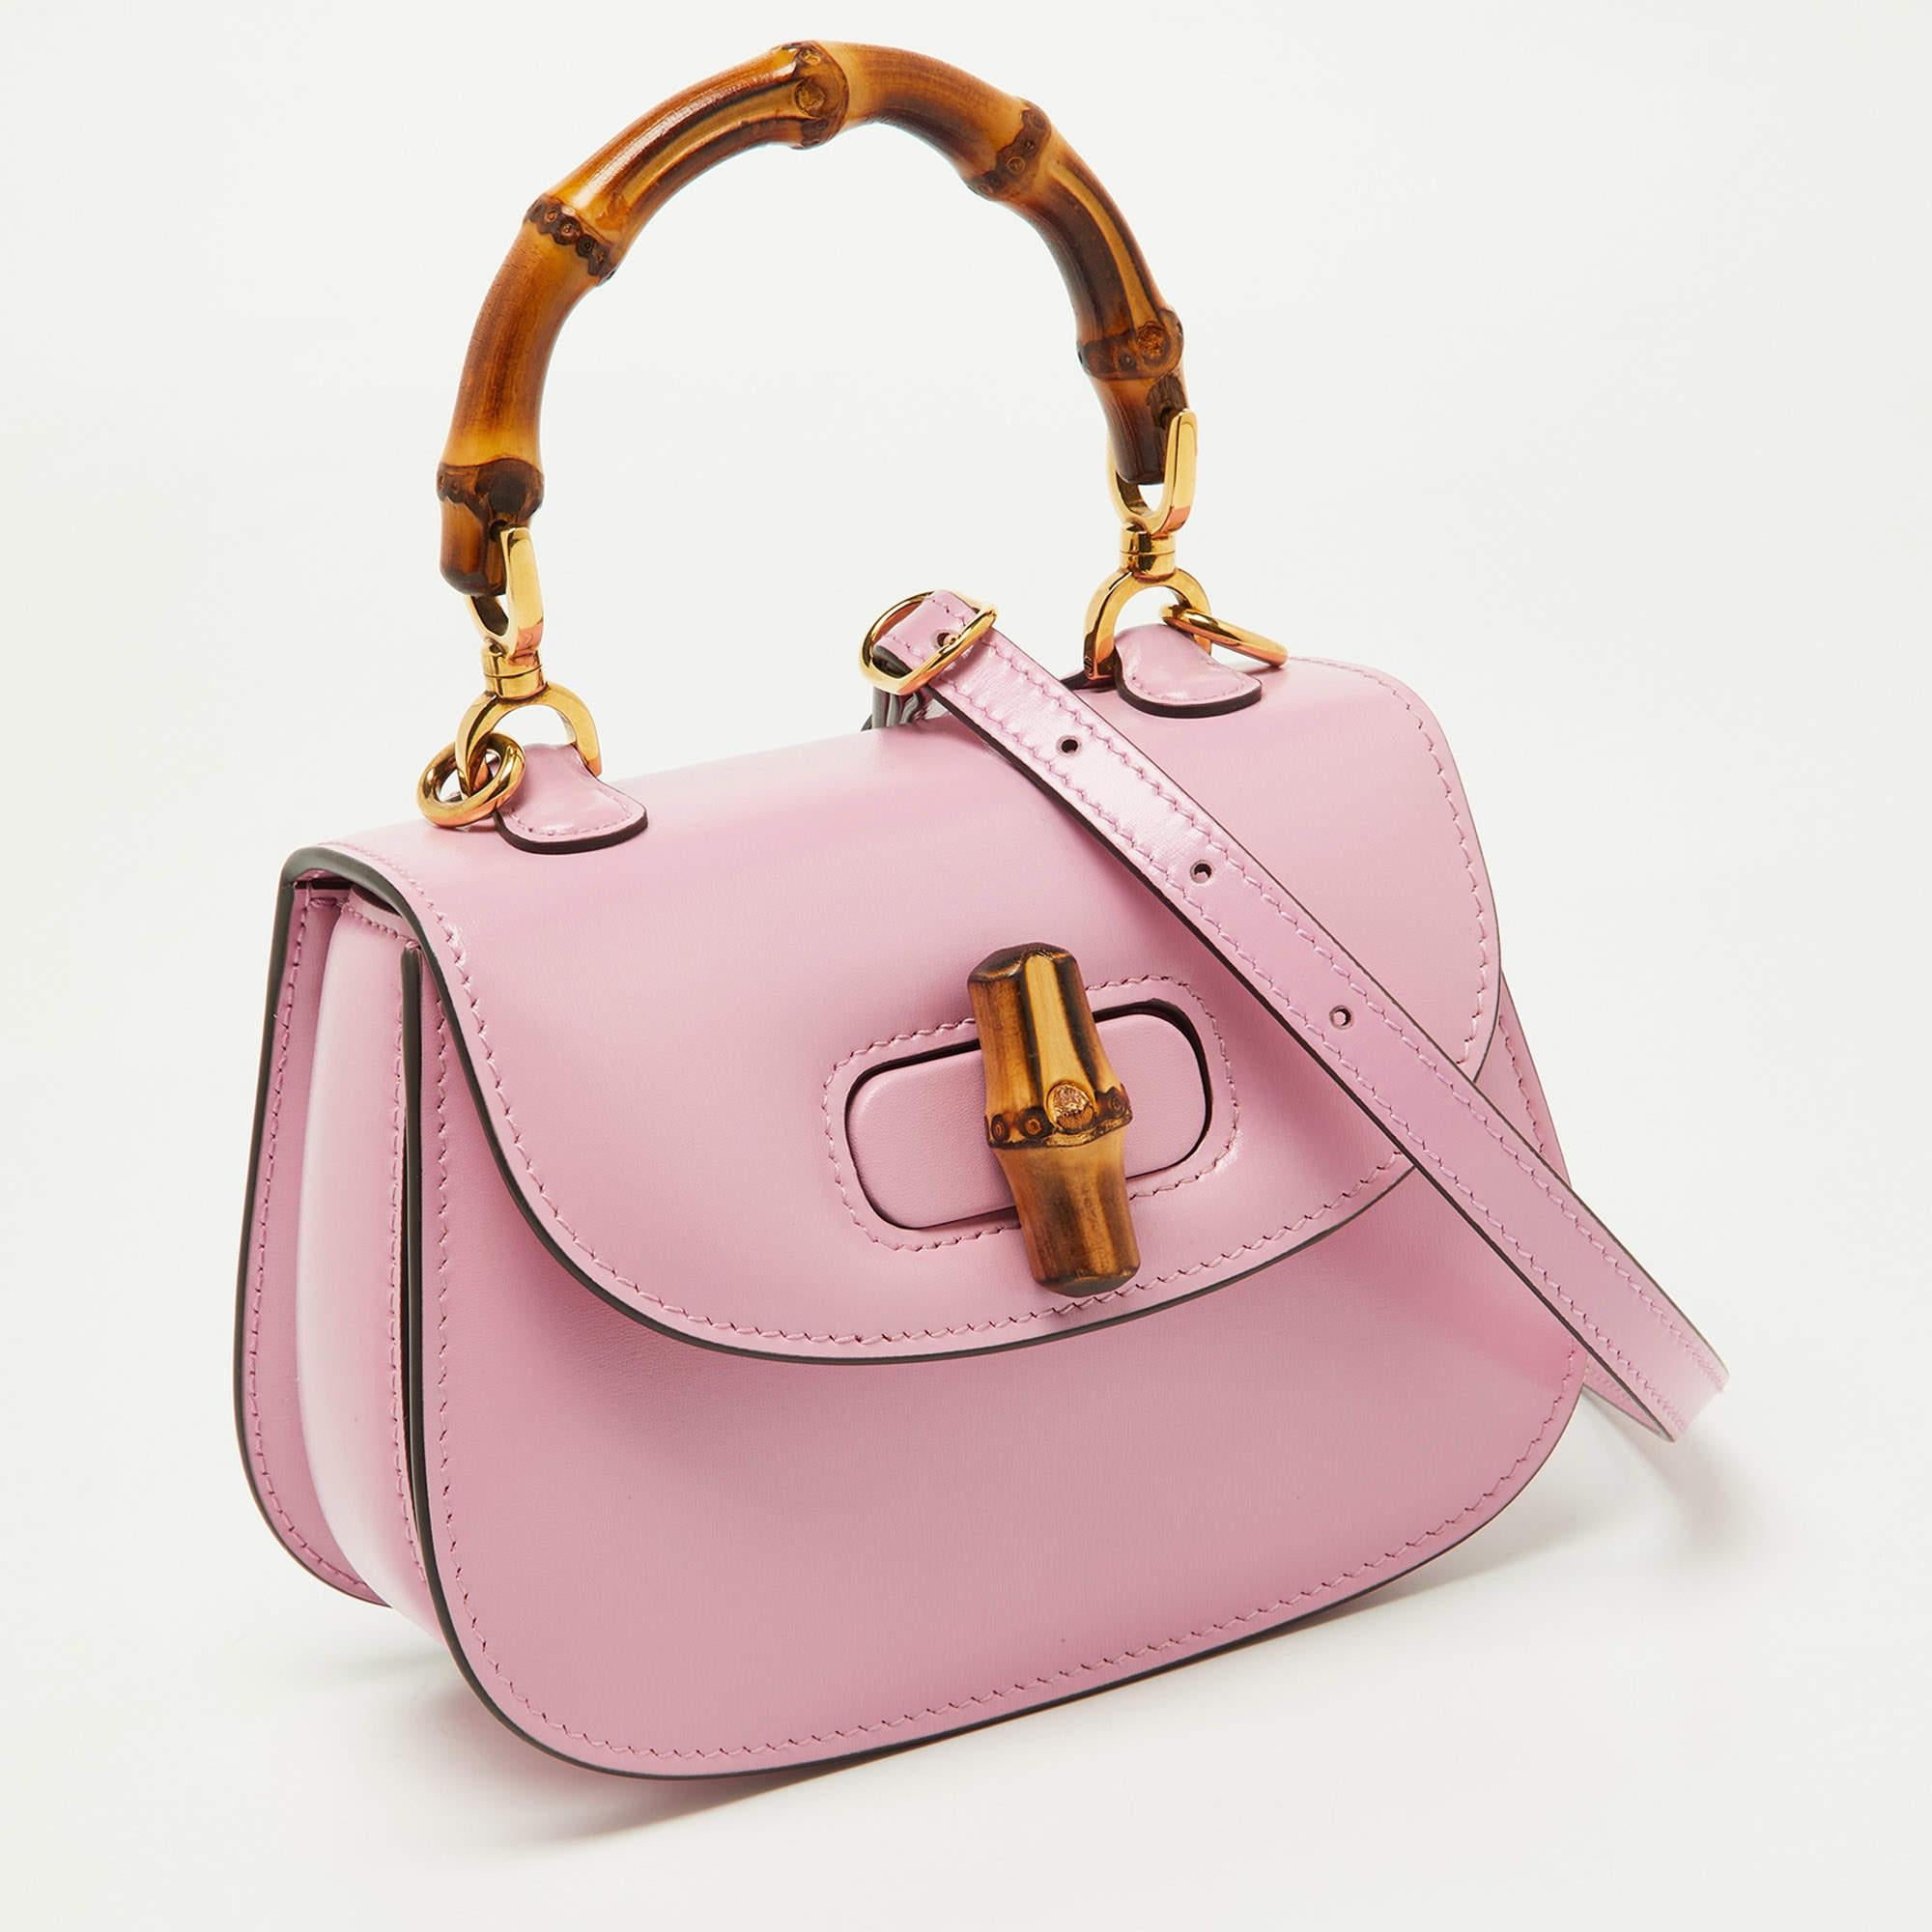 Crafted with elegance and sophistication, the Gucci Top Handle Bag epitomizes timeless style. Its supple pink leather exudes luxury, while the iconic bamboo top handle adds a touch of exotic charm. Compact yet functional, it seamlessly blends